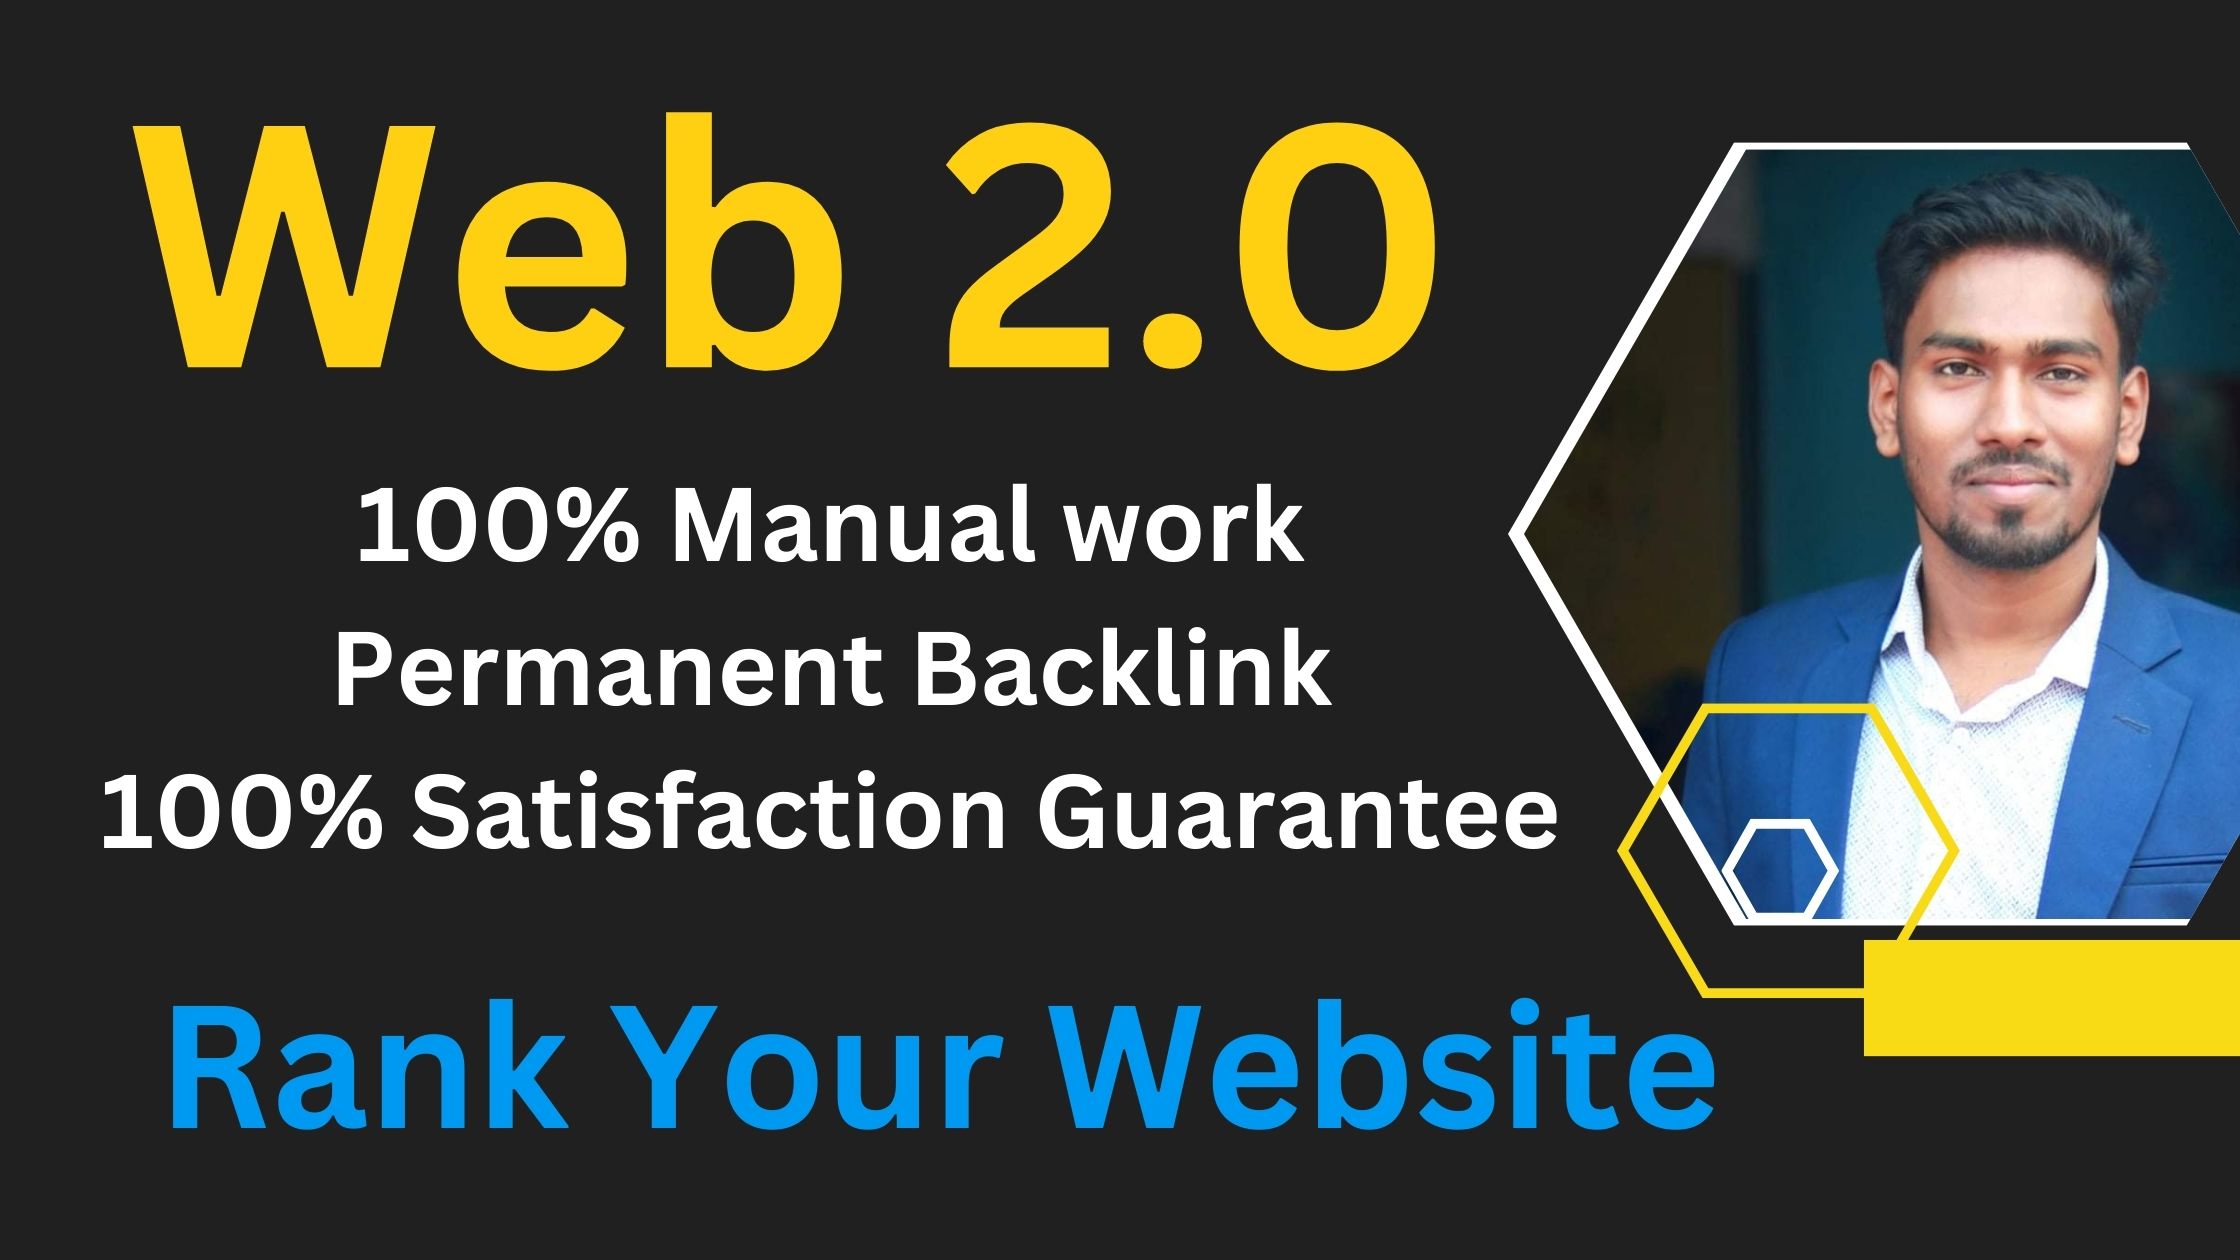 I will publish 40+ Article web 2.0 backlinks to high quality websites